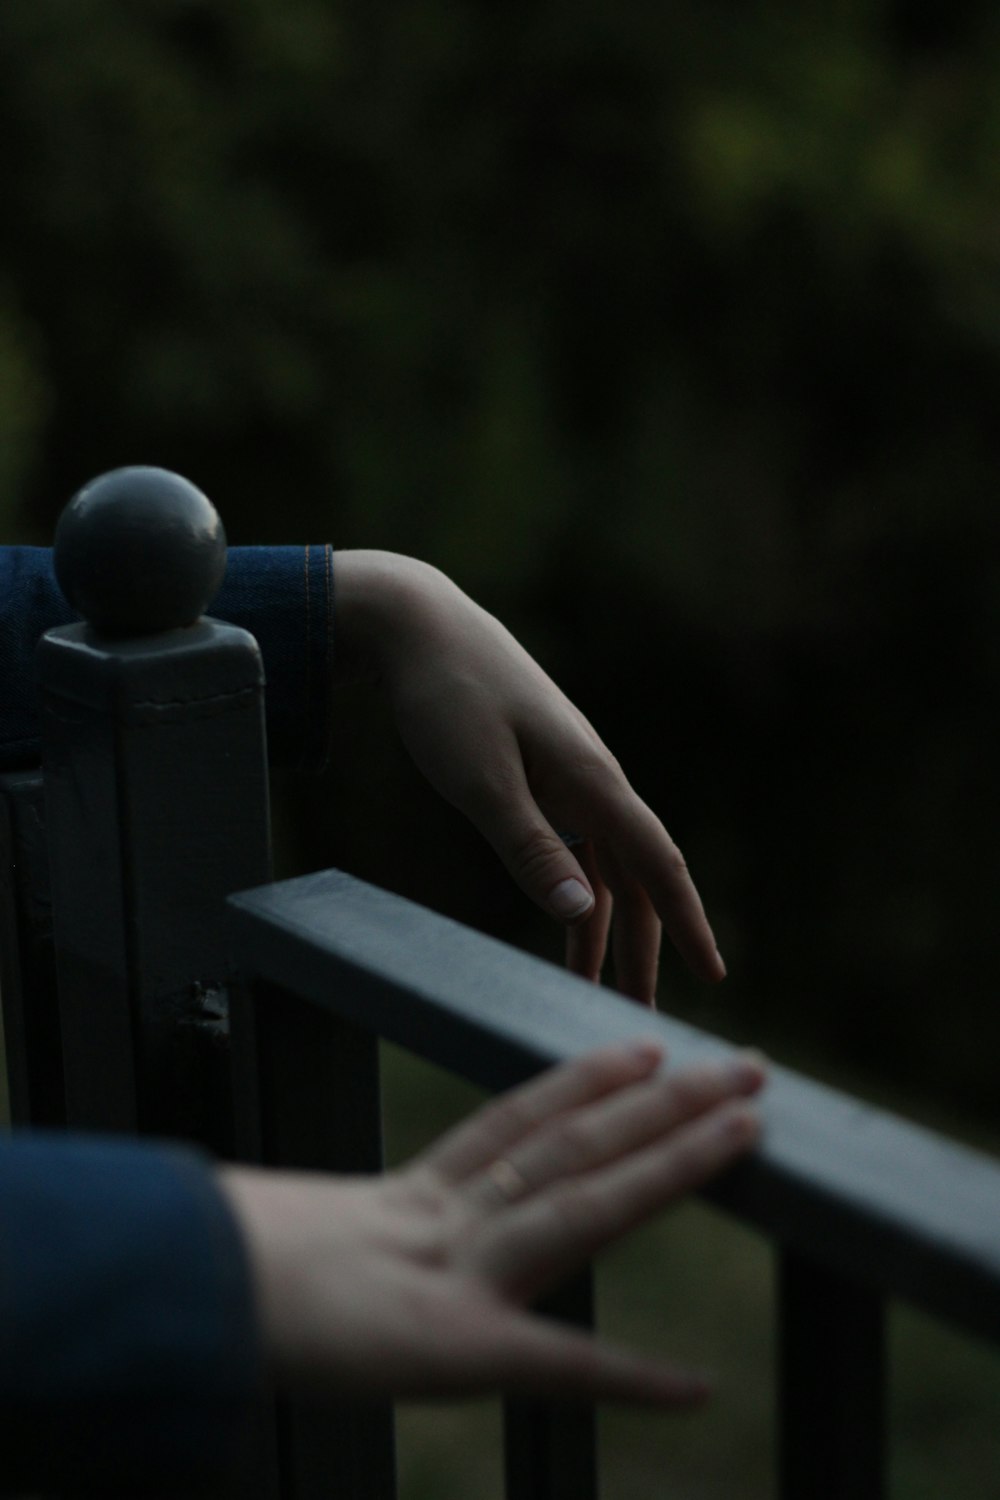 a hand reaching over a railing towards a person's hand